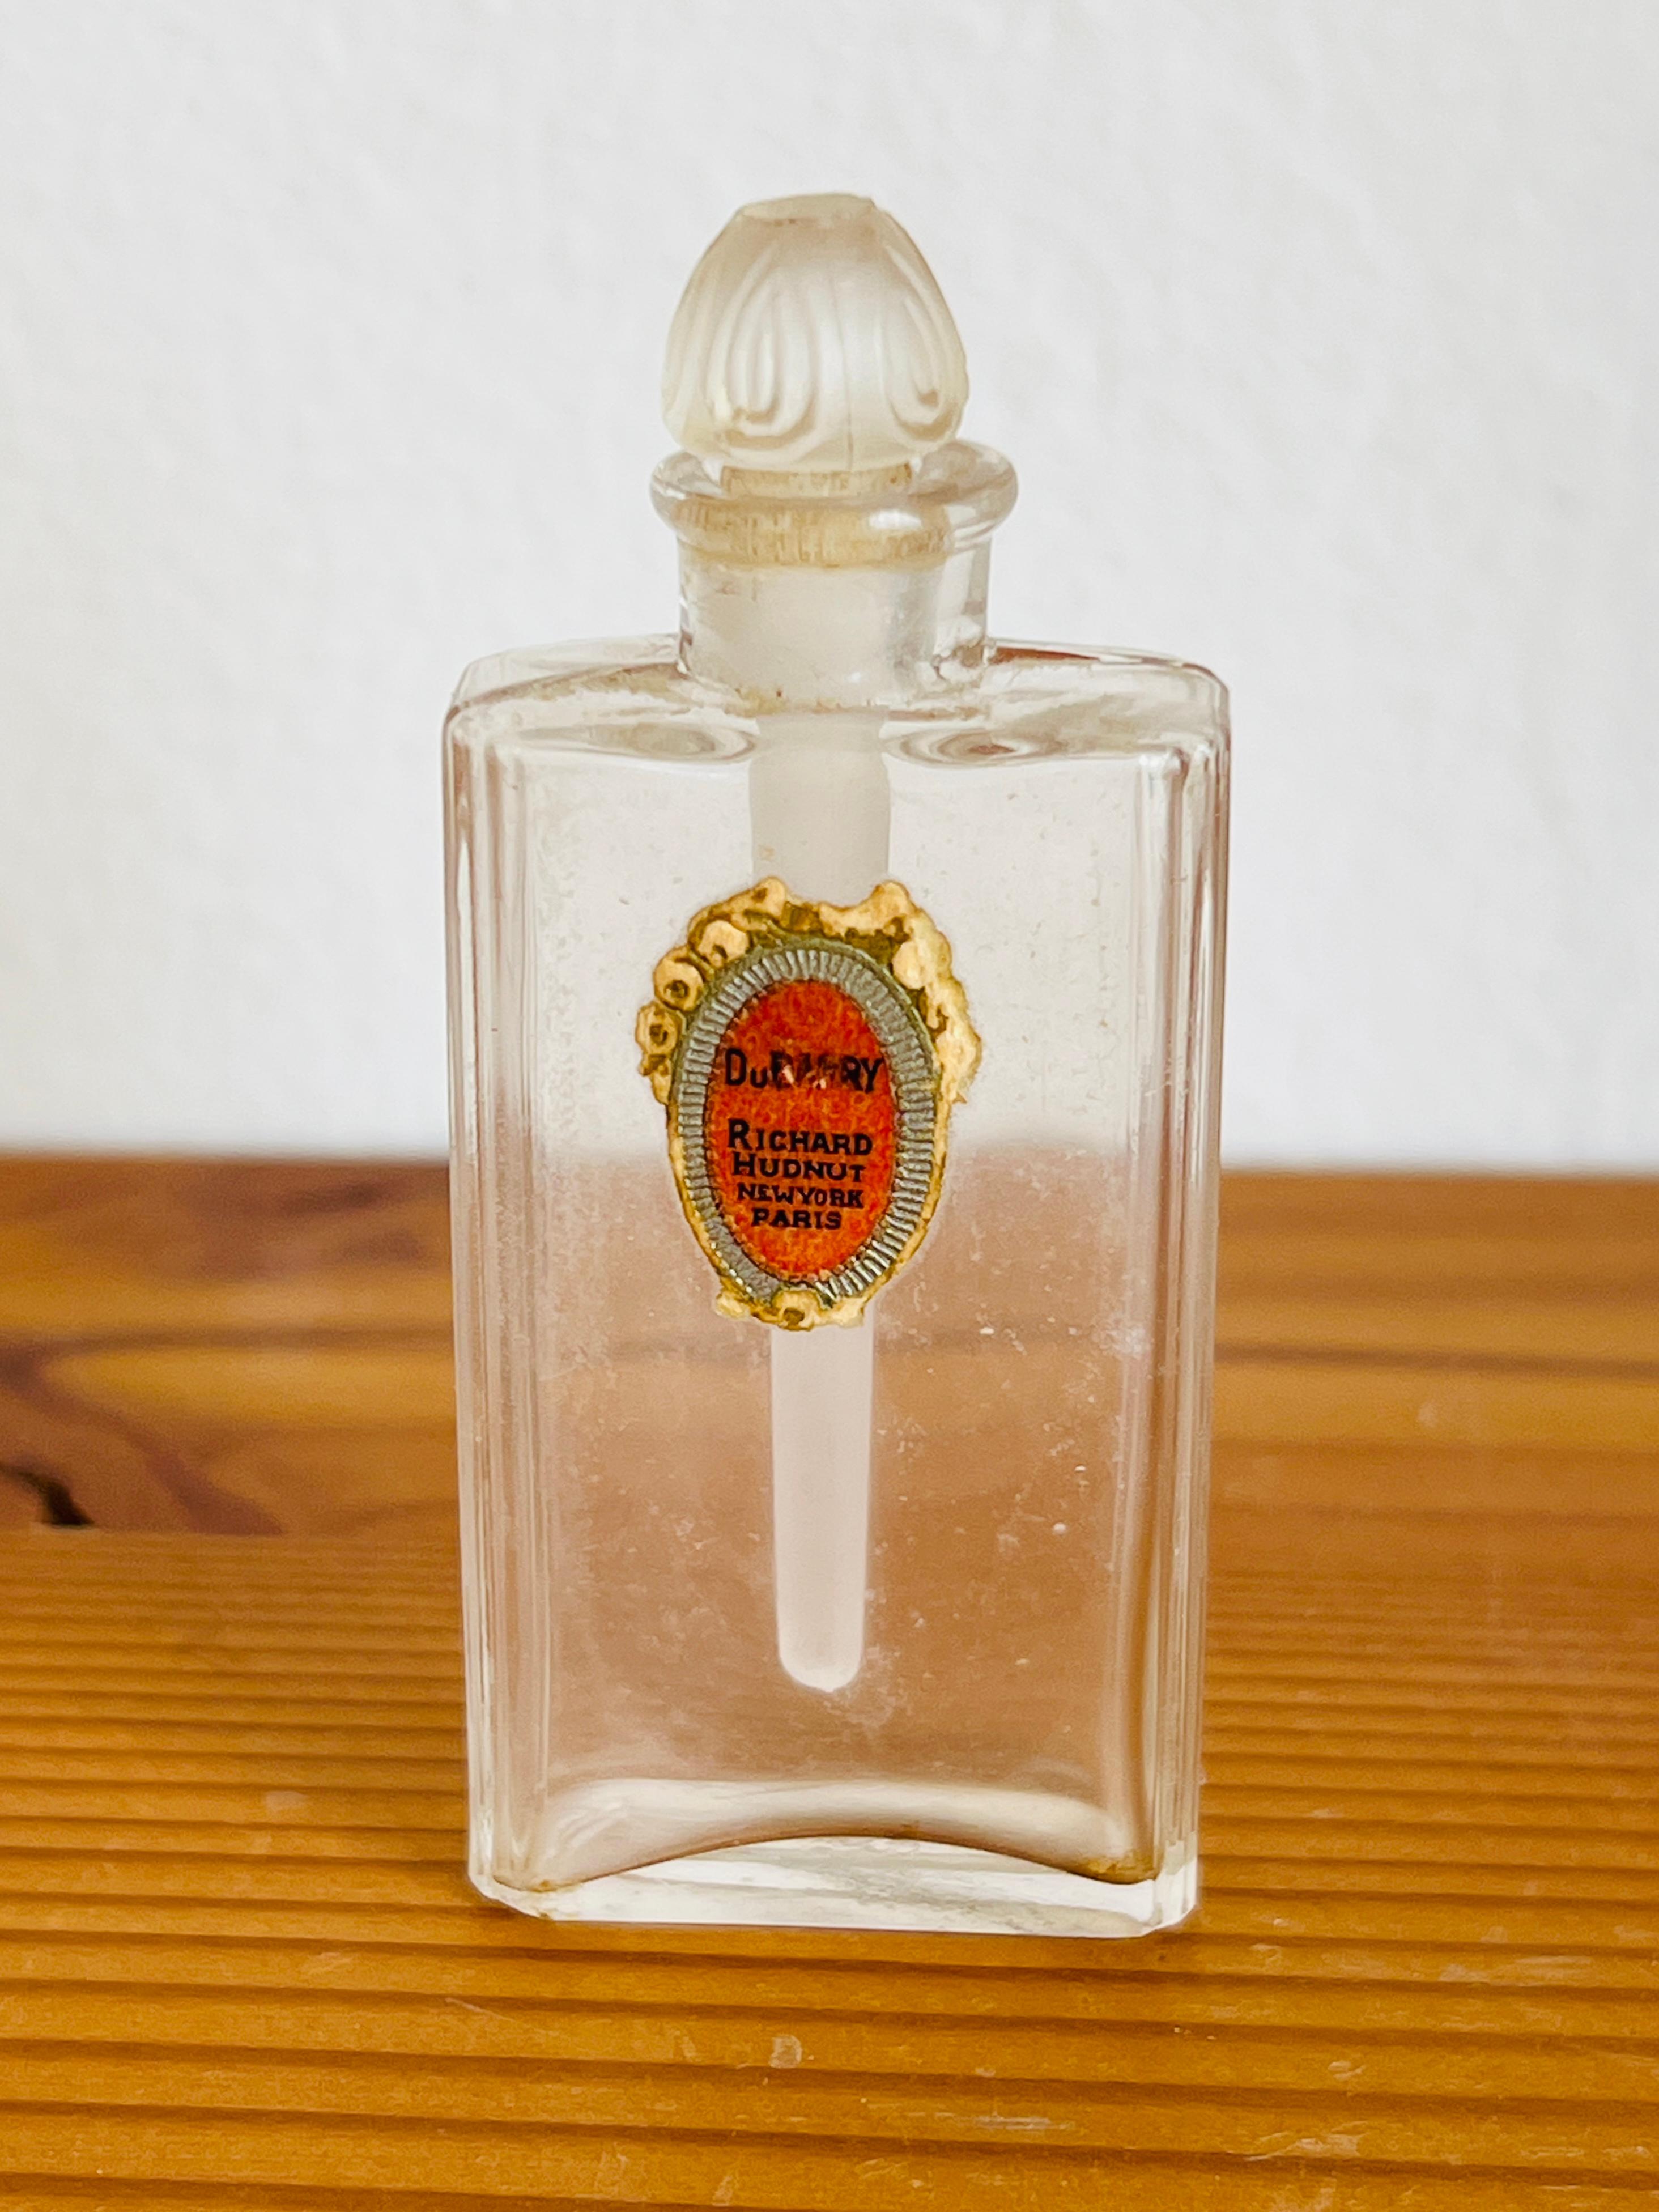 This very rare minature perfume bottle once held the perfume Dubarry by Richard Hudnut. 

Size: 2-1/4